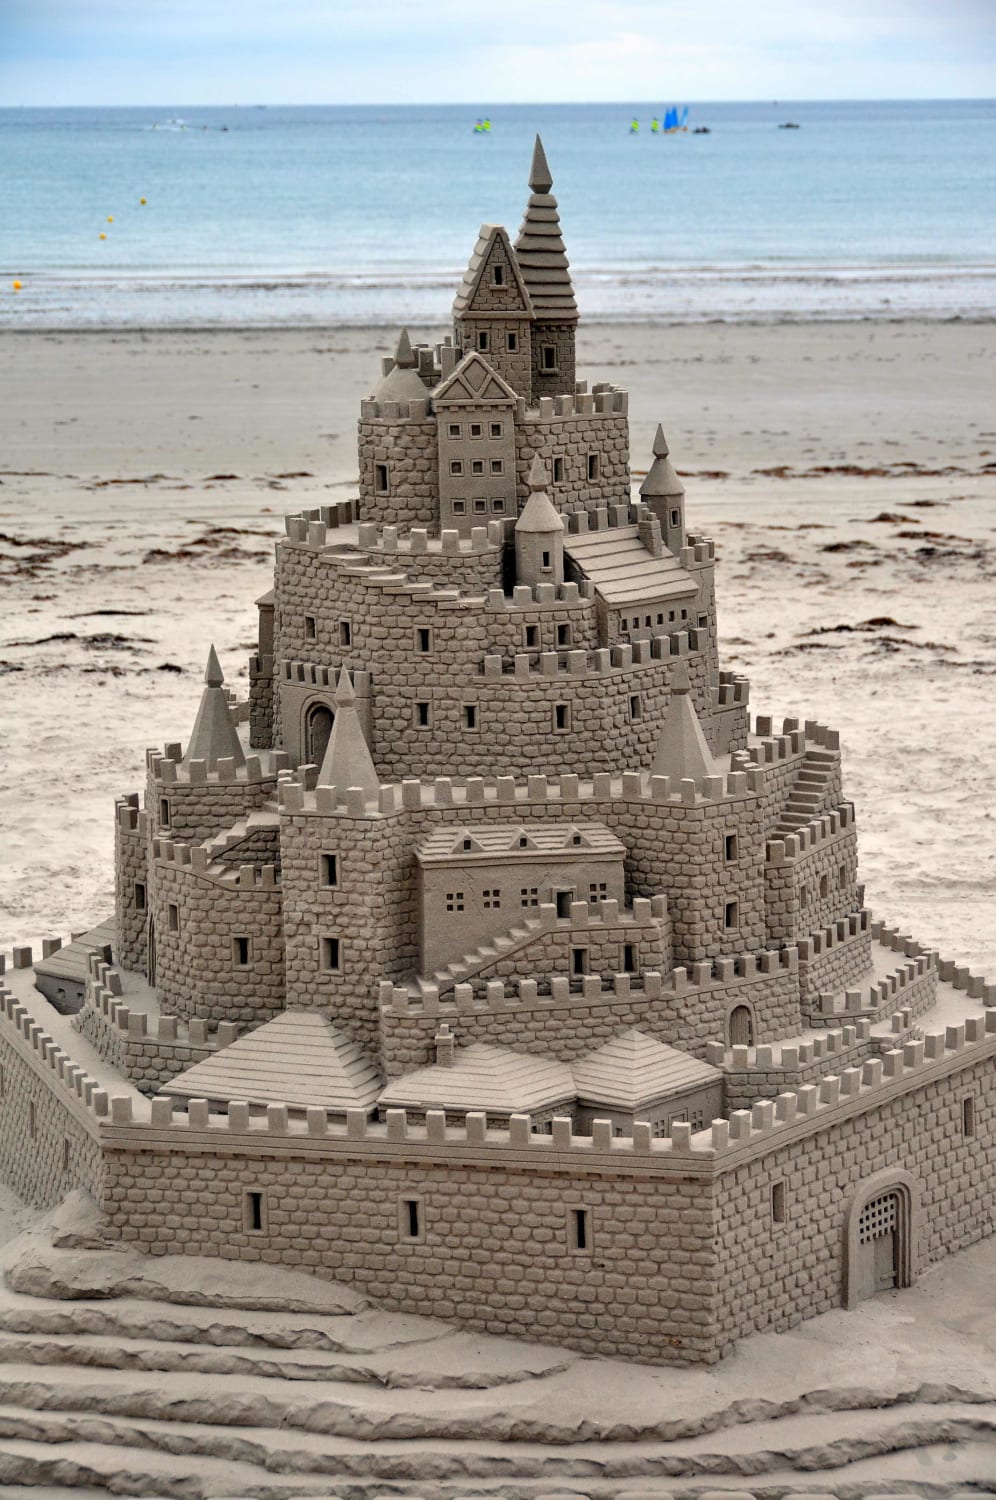 A Very Detailed Sandcastle